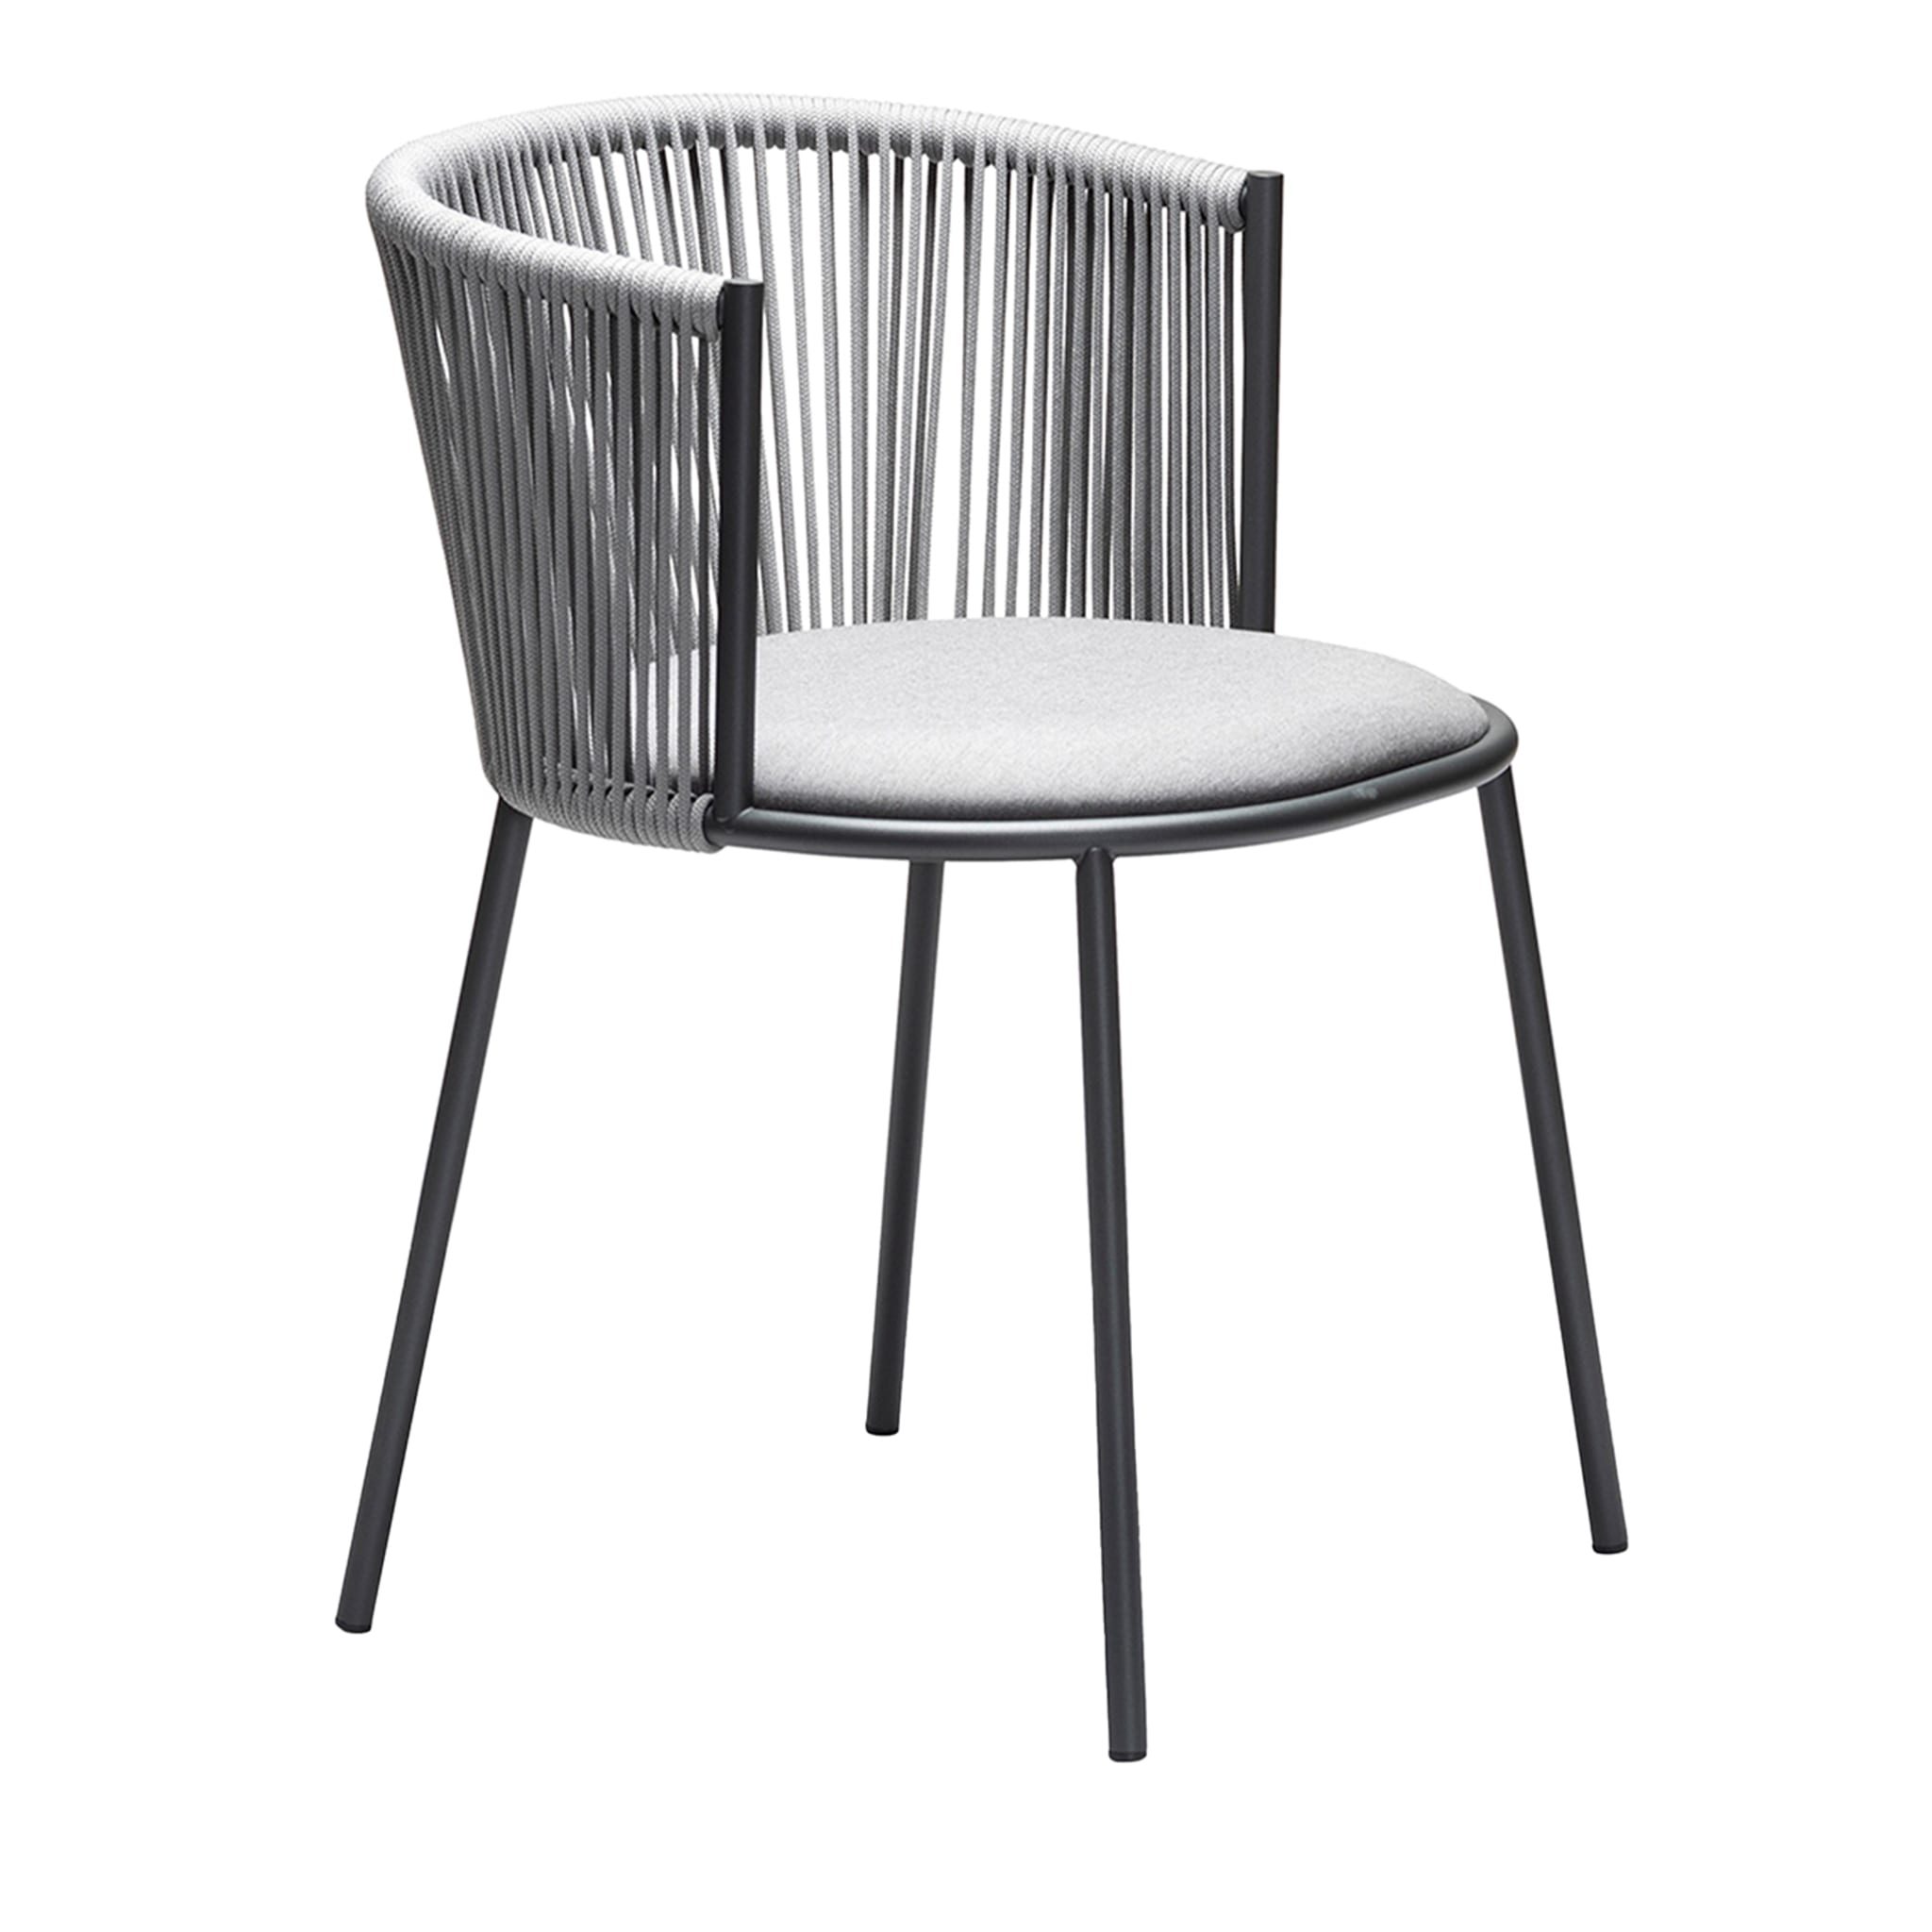 Millie SP Gray Chair - Main view